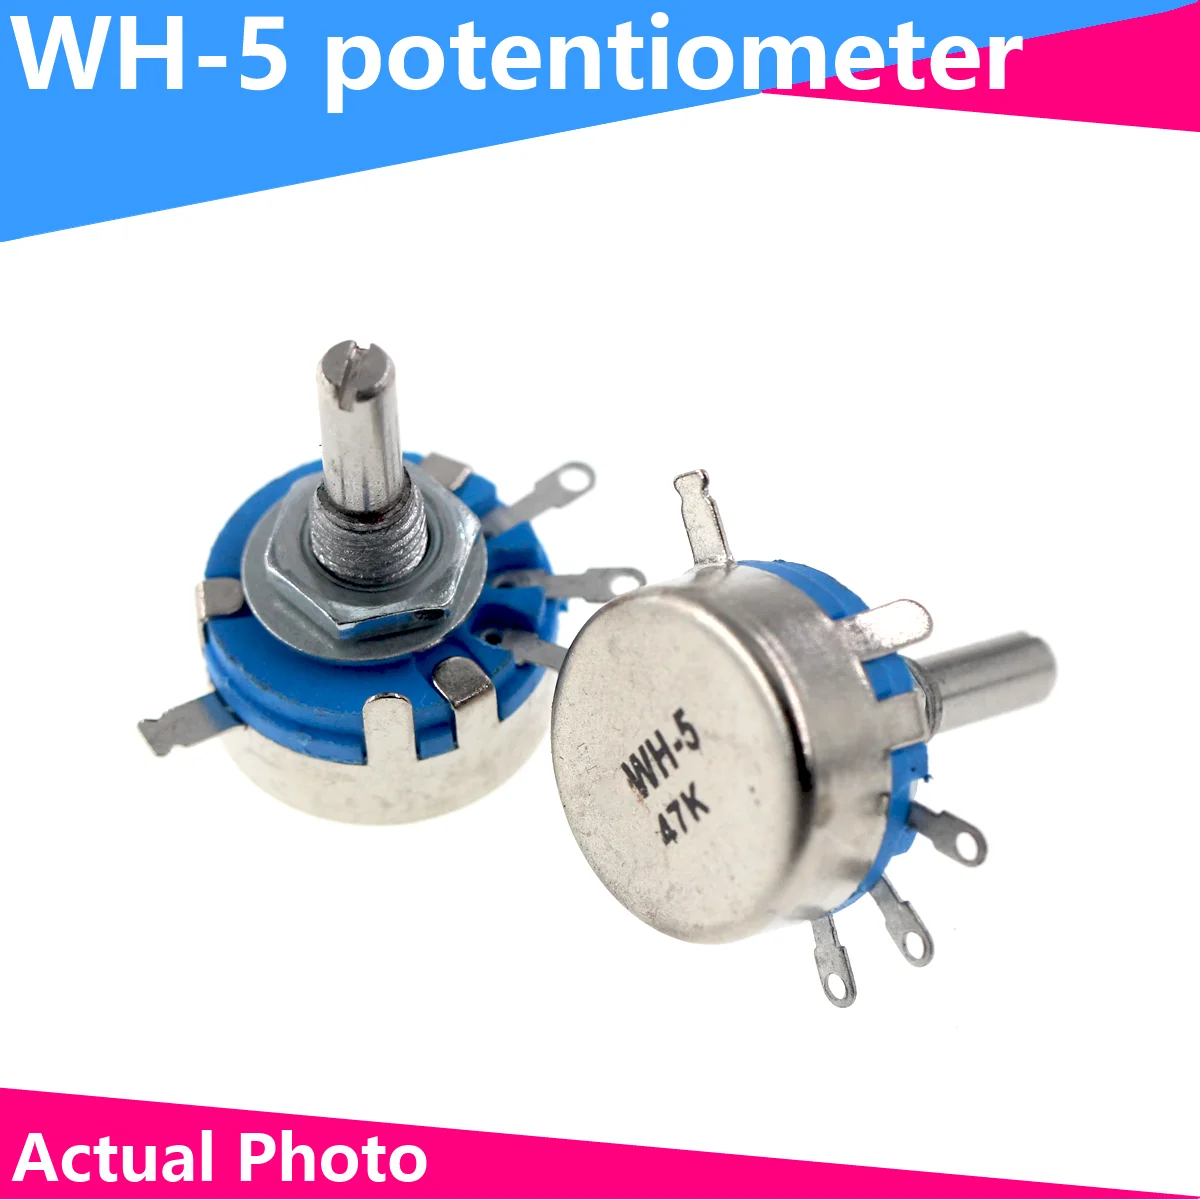 2PCS WH5-1A 470R 1K 10K 47K 4K7 100K 470K 220K 1K5 22K 1M ohm 3-Terminals Round Shaft Rotary Taper Carbon Potentiometer WH5 2pcs wth118 2w 1a potentiometer 470r 1k 2 2k 4 7k 10k 22k 47k 100k 470k 560k 1m round shaft carbon rotary taper potentiometer